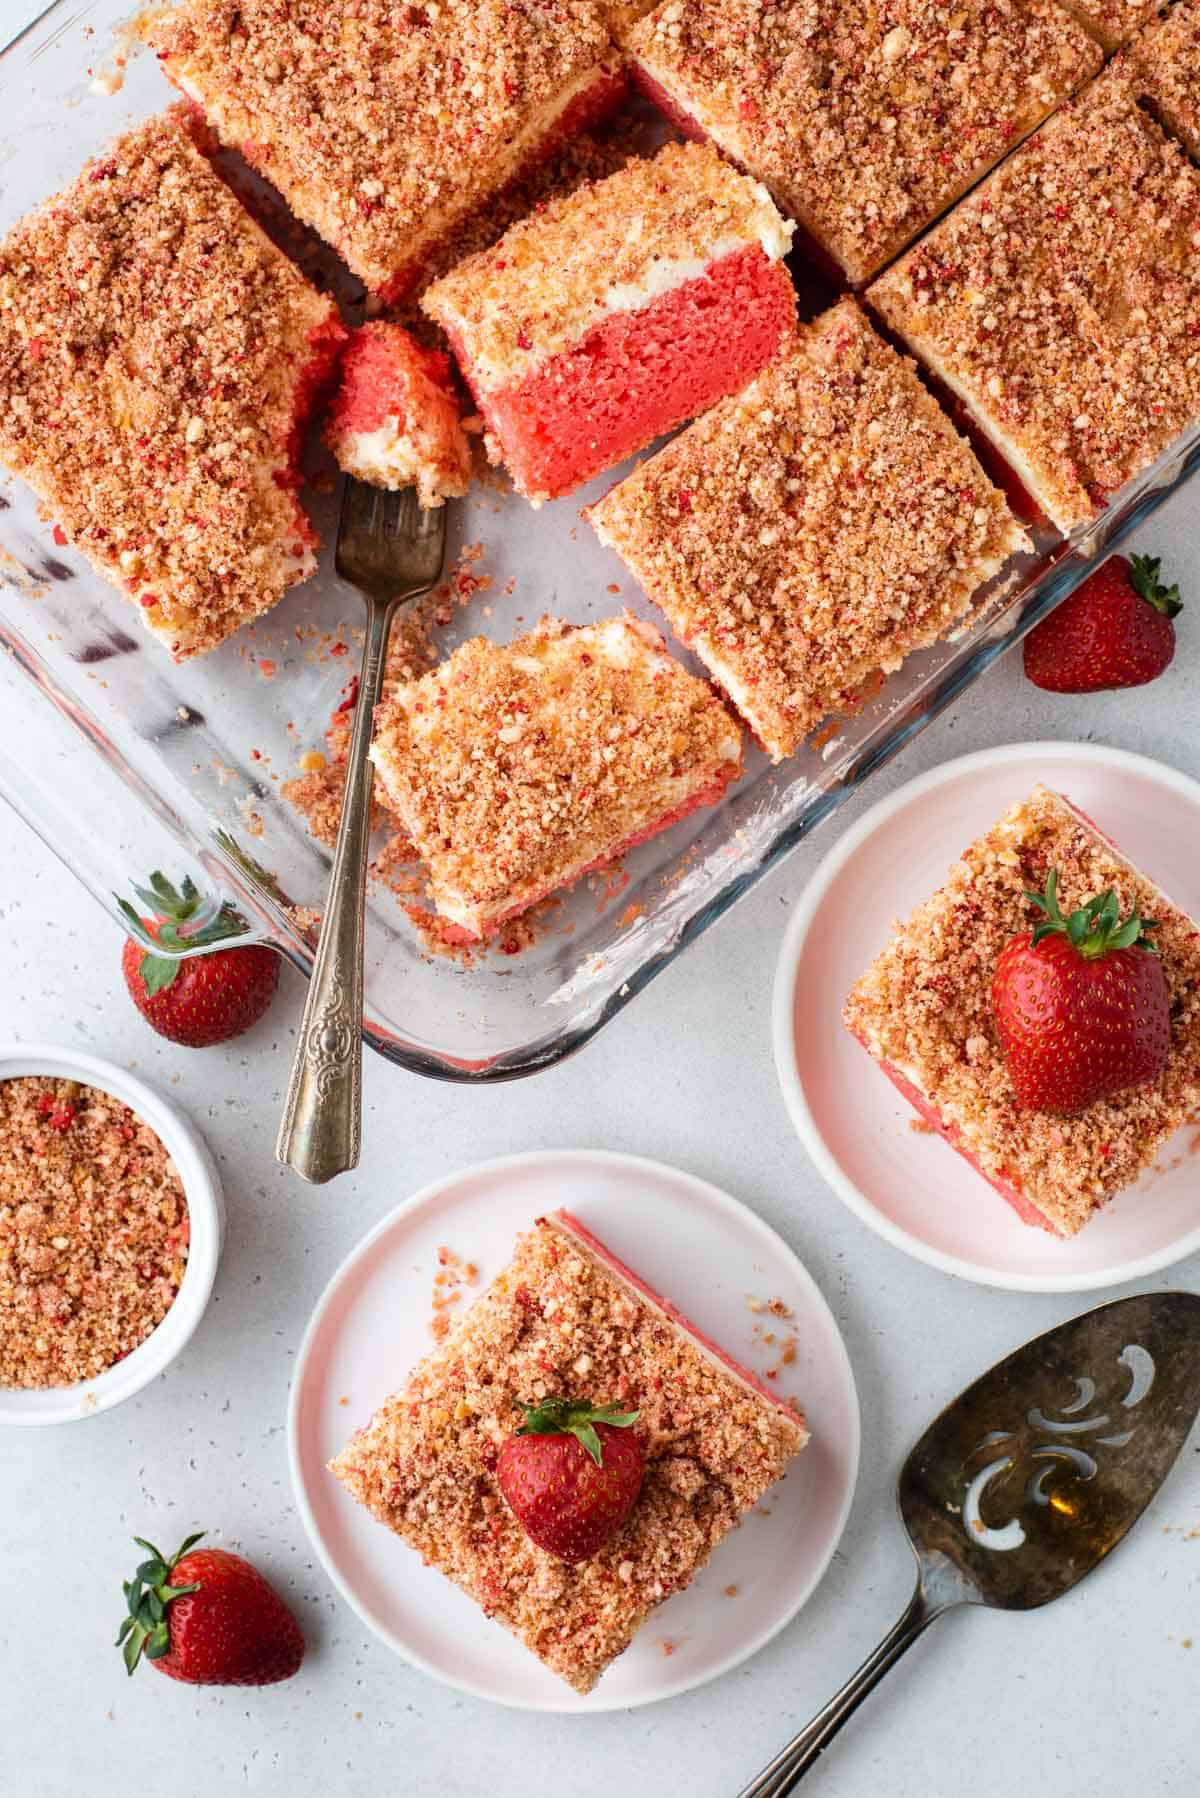 clear glass baking dish full of sliced strawberry crunch cake beside two white plates with slices of cake on them, strawberries, a spoon, and a bowl of cake crumble topping